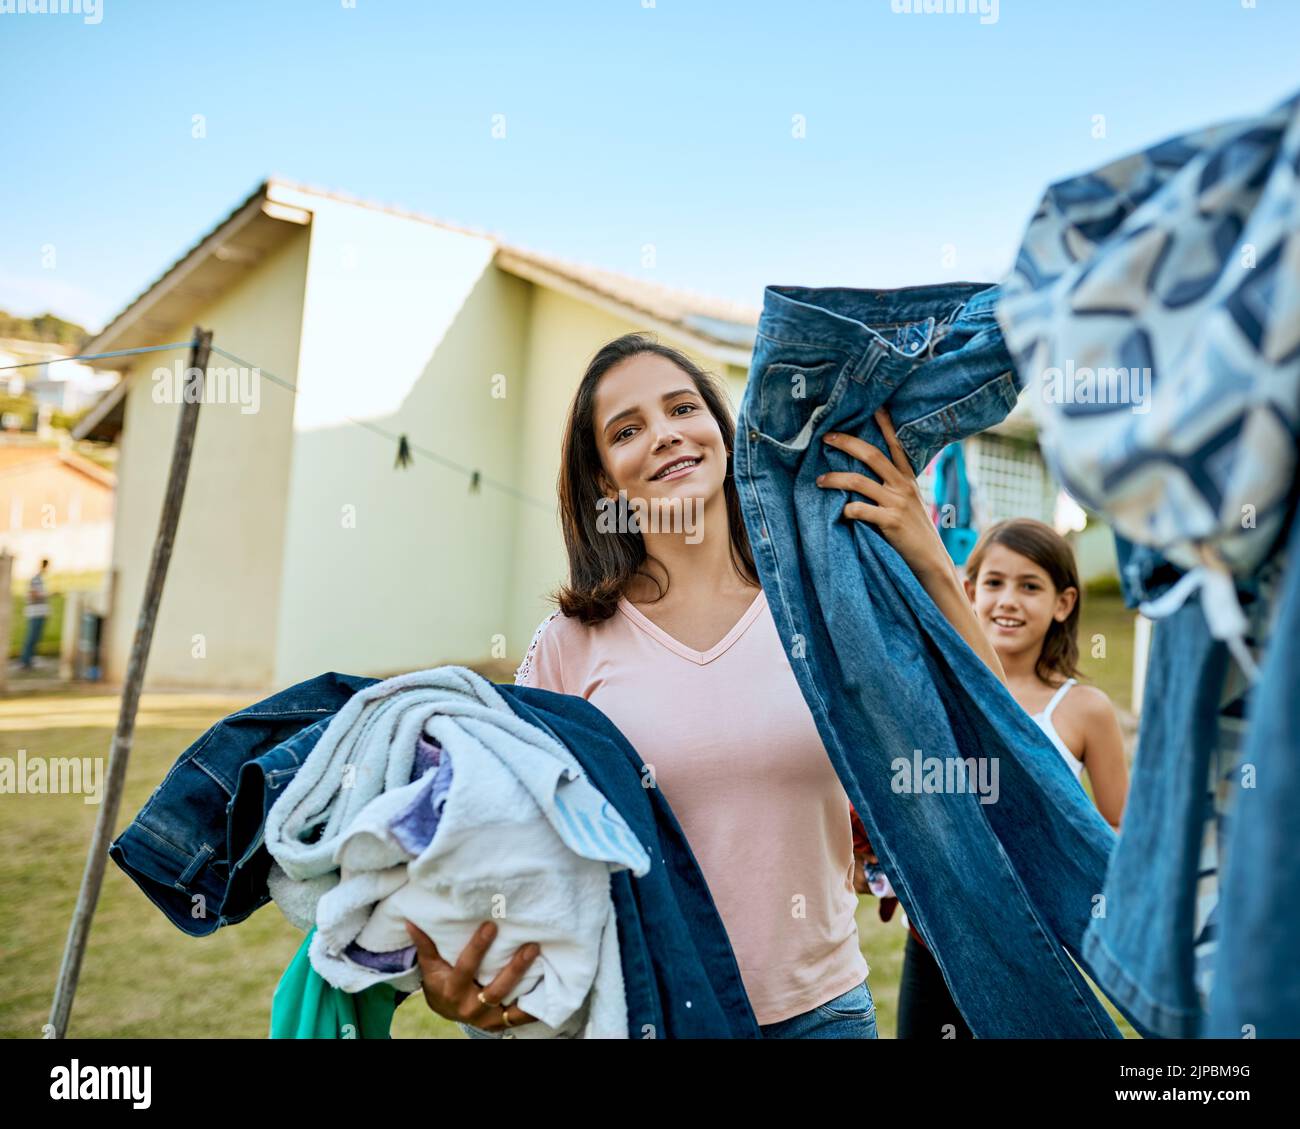 My family deserves clean clothes everyday. Portrait of a mother and daughter hanging up laundry together outside. Stock Photo